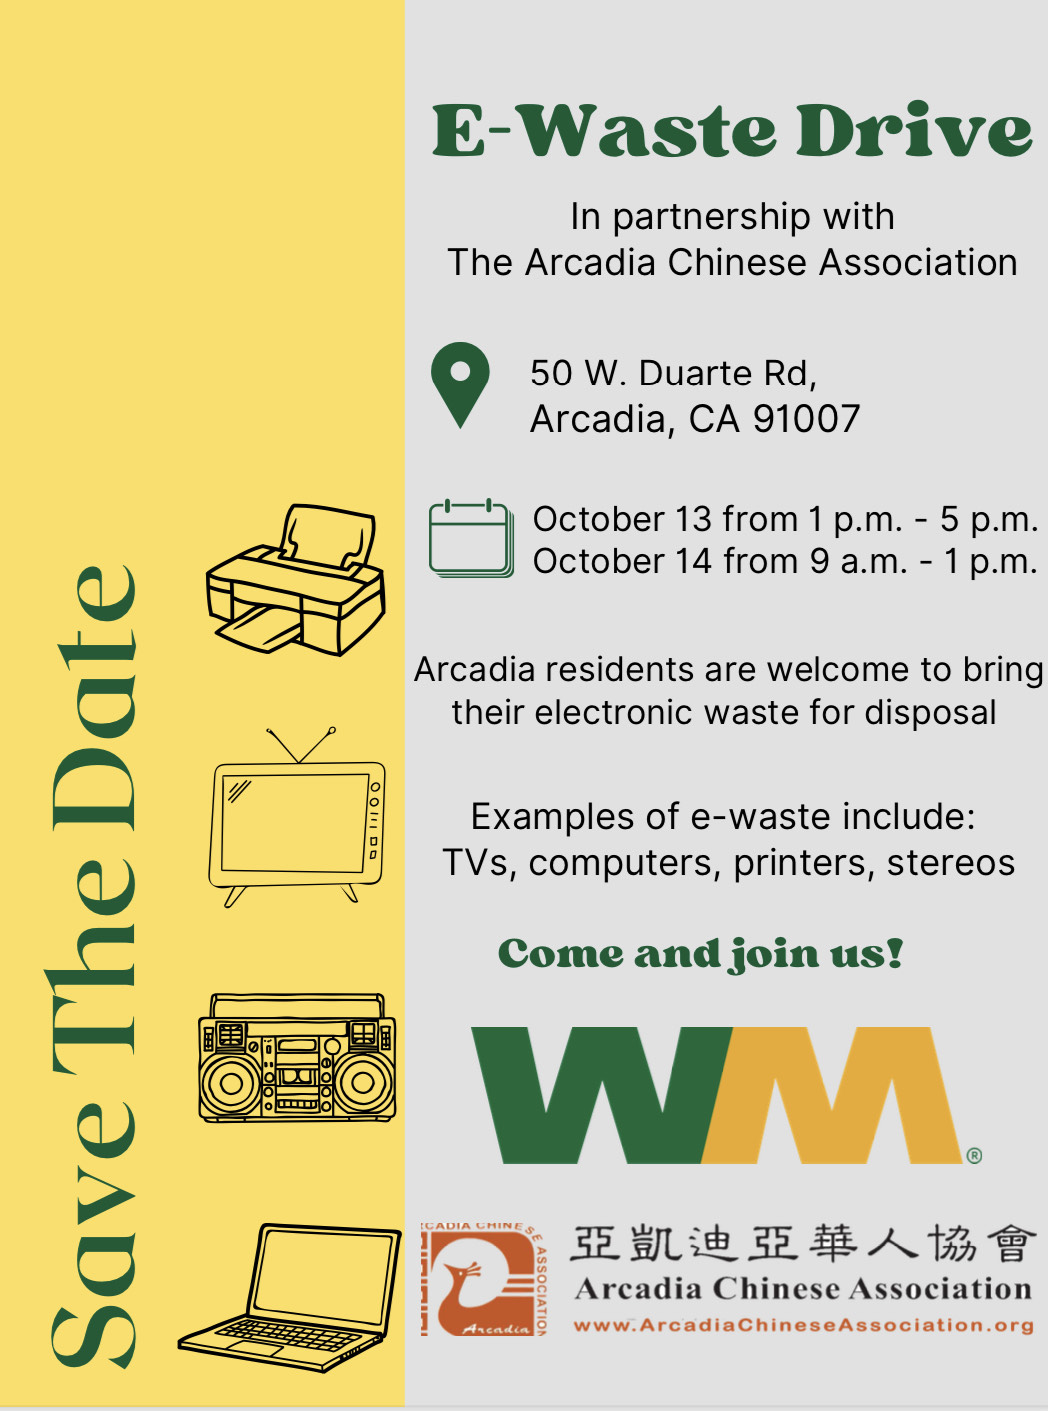 E Waste recycling event with Arcadia Chinese Association and Waste Management 